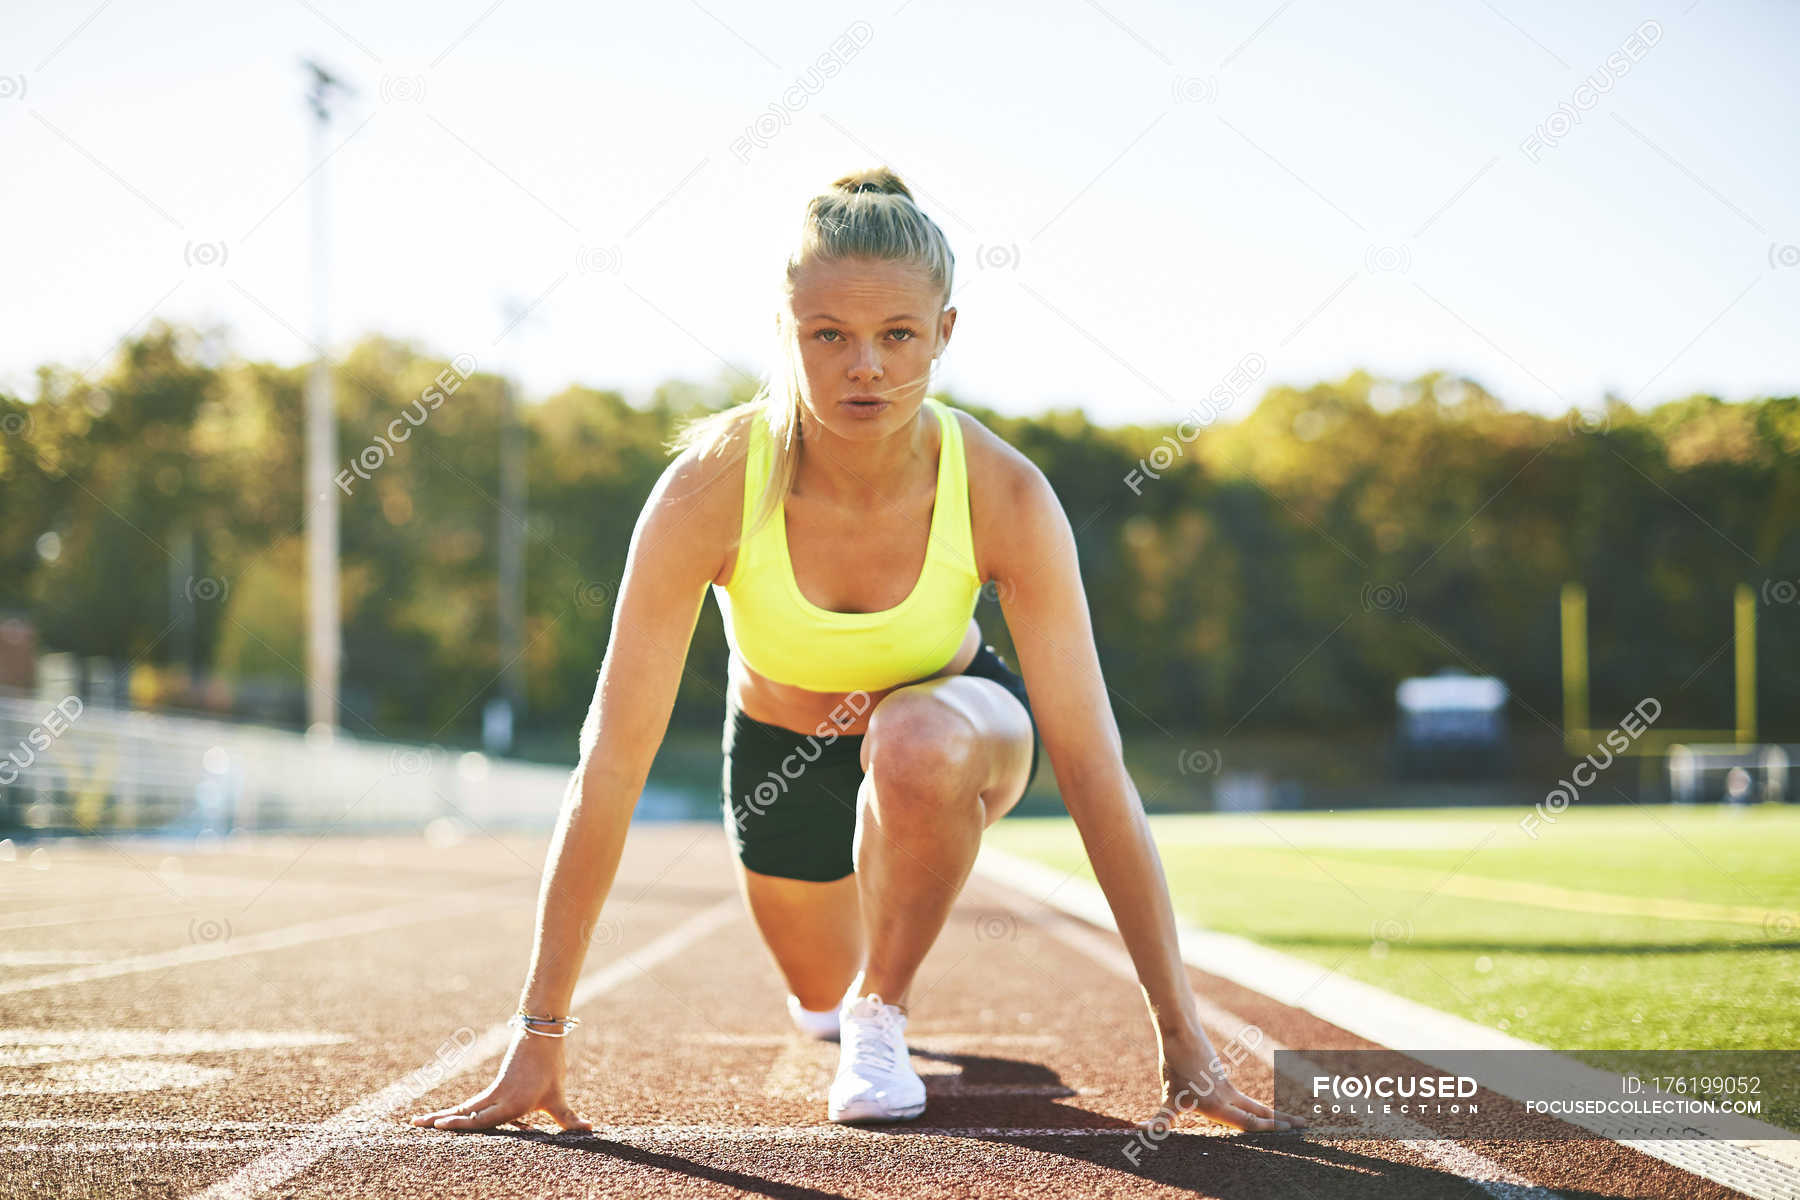 A Female Runner In The Starting Position — Stock Photo | #176199052